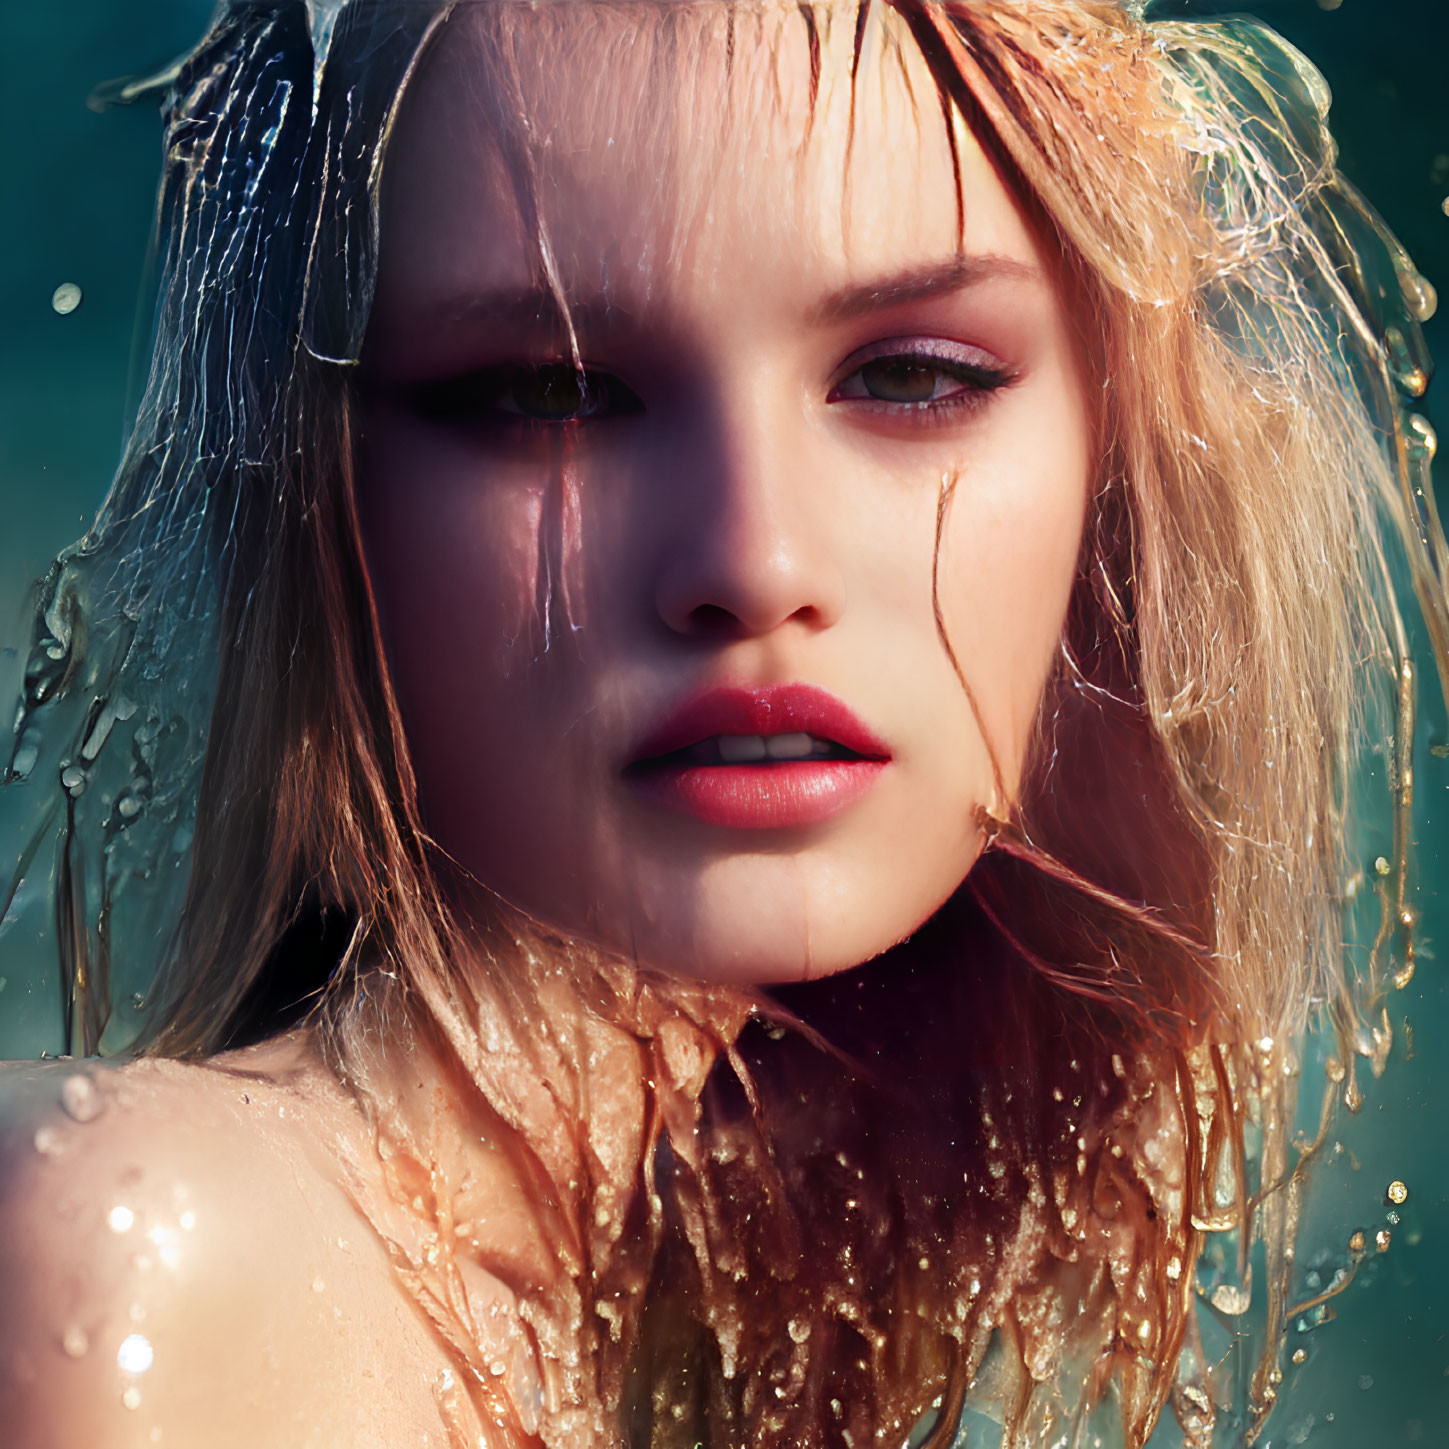 Close-up of woman with water splashing on hair and face, emphasizing striking features.